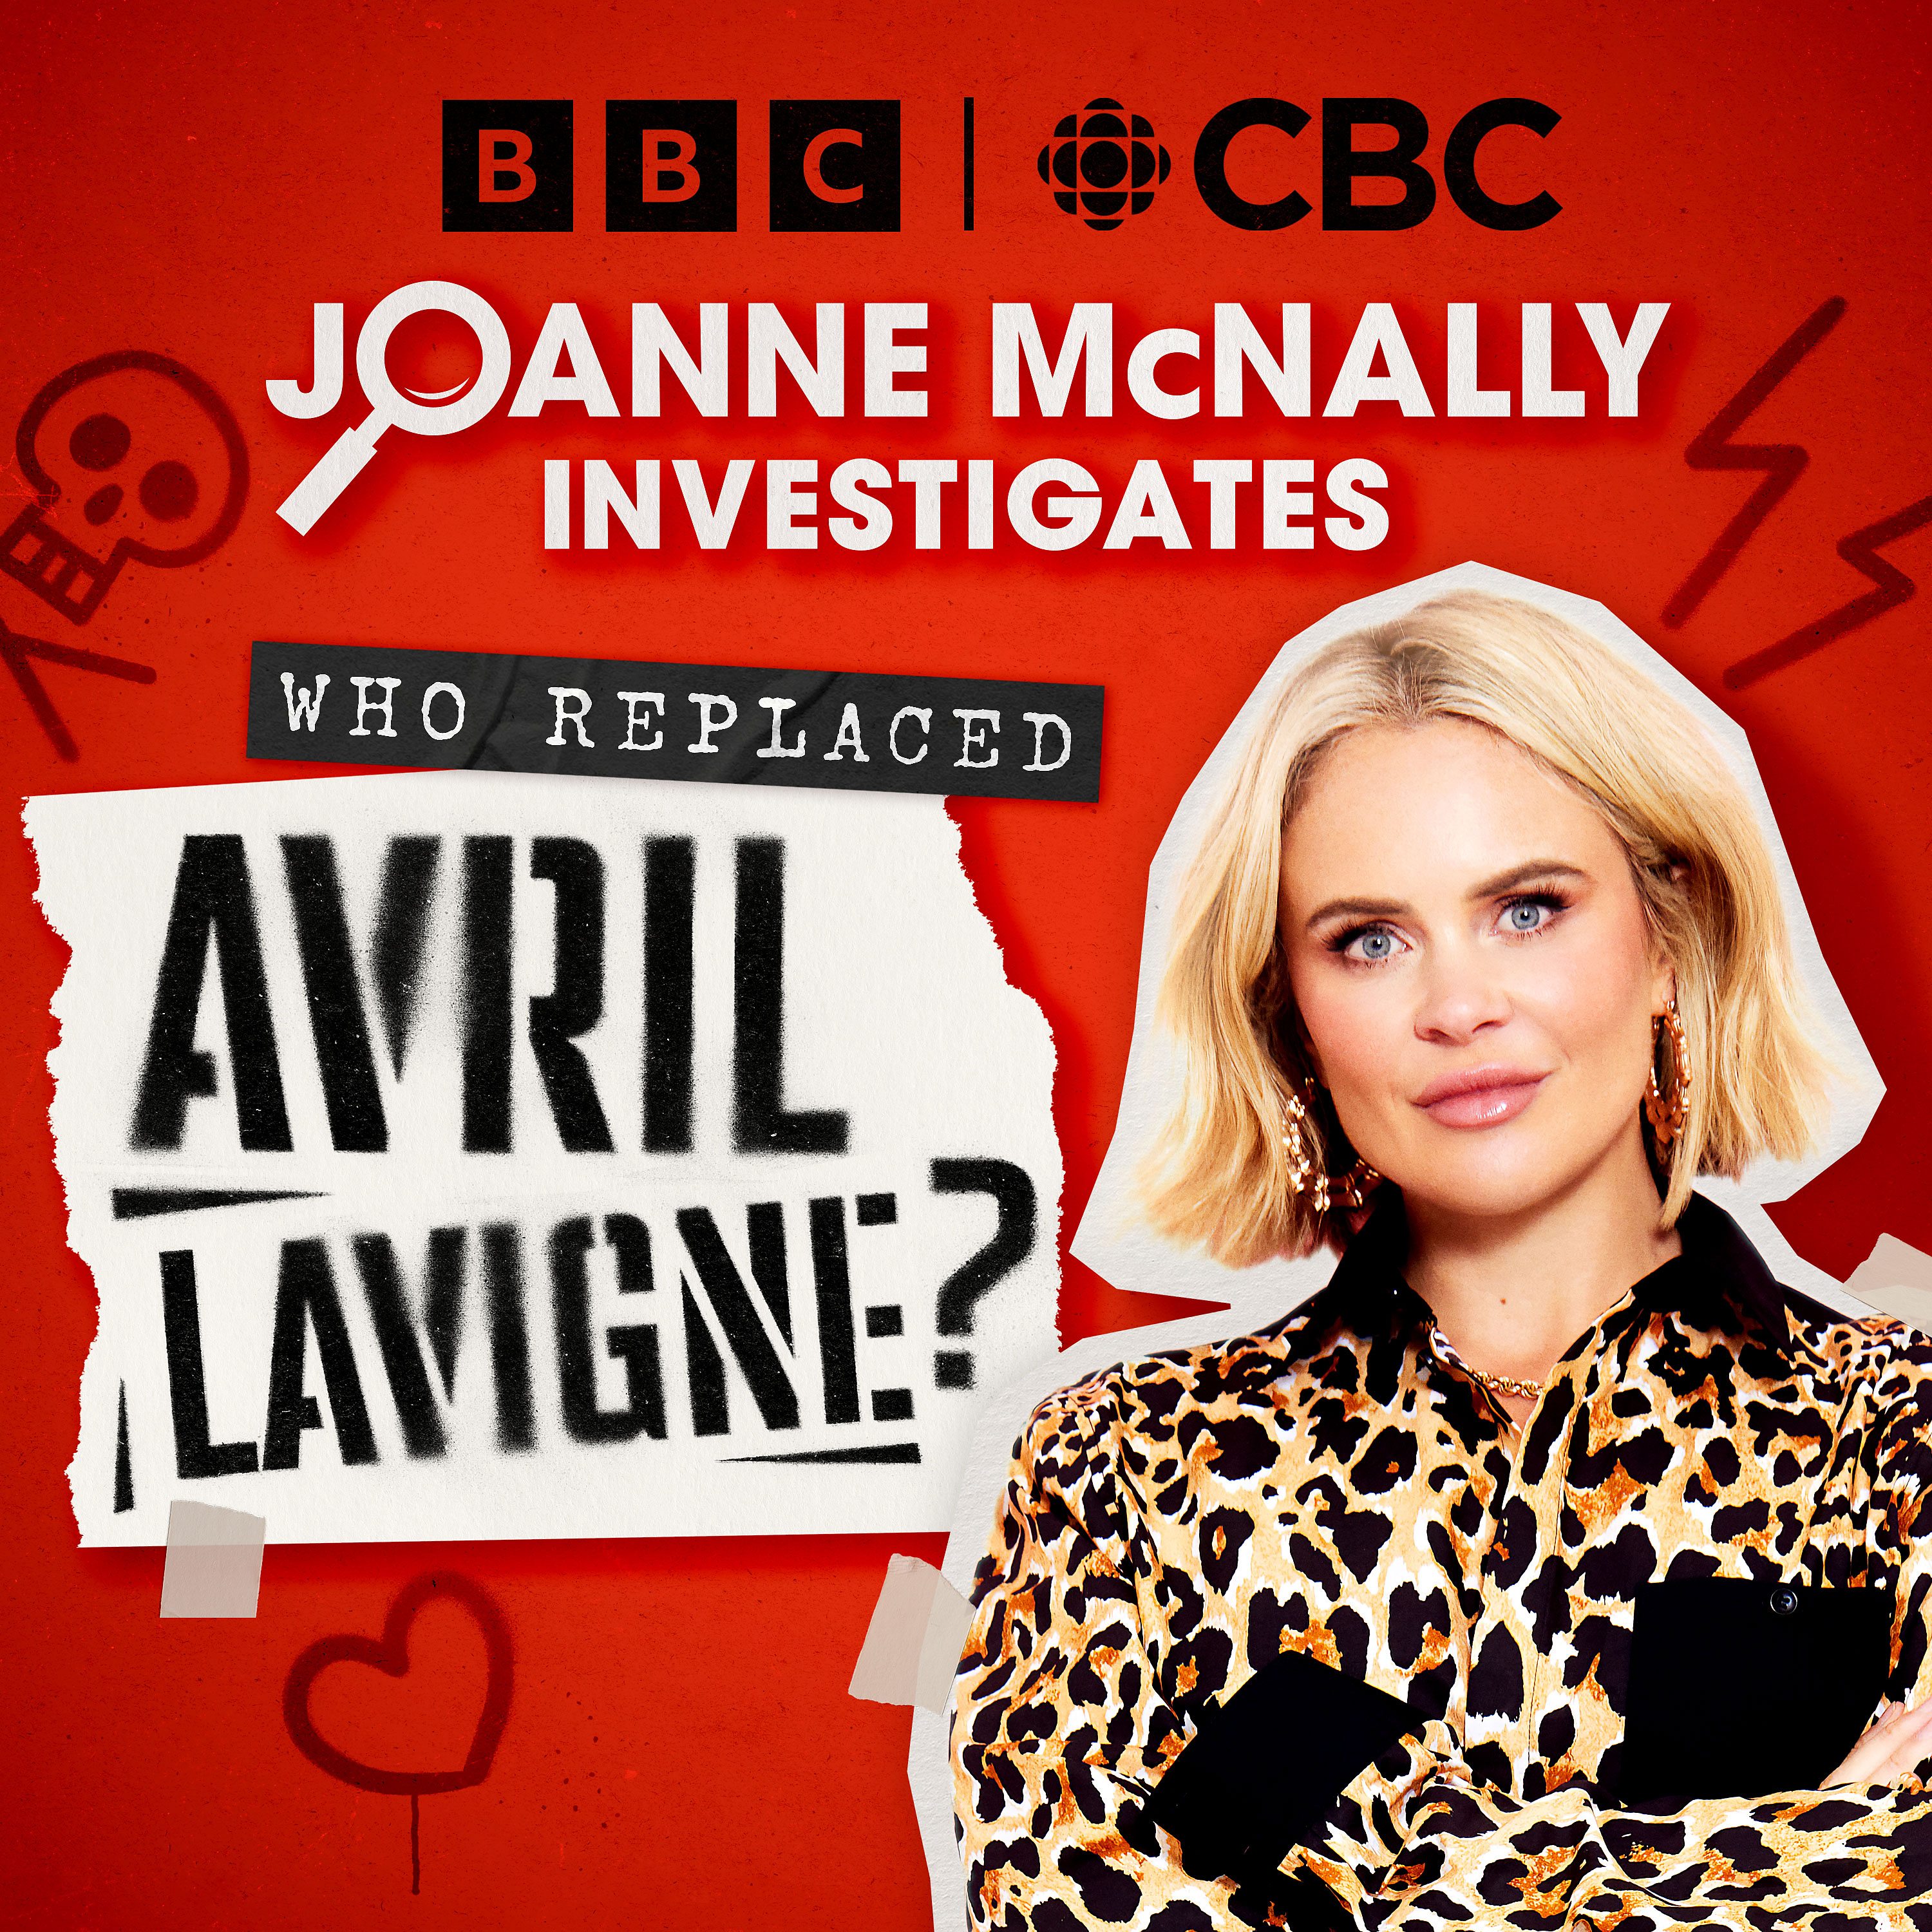 Who Replaced Avril Lavigne? Joanne McNally Investigates podcast show image